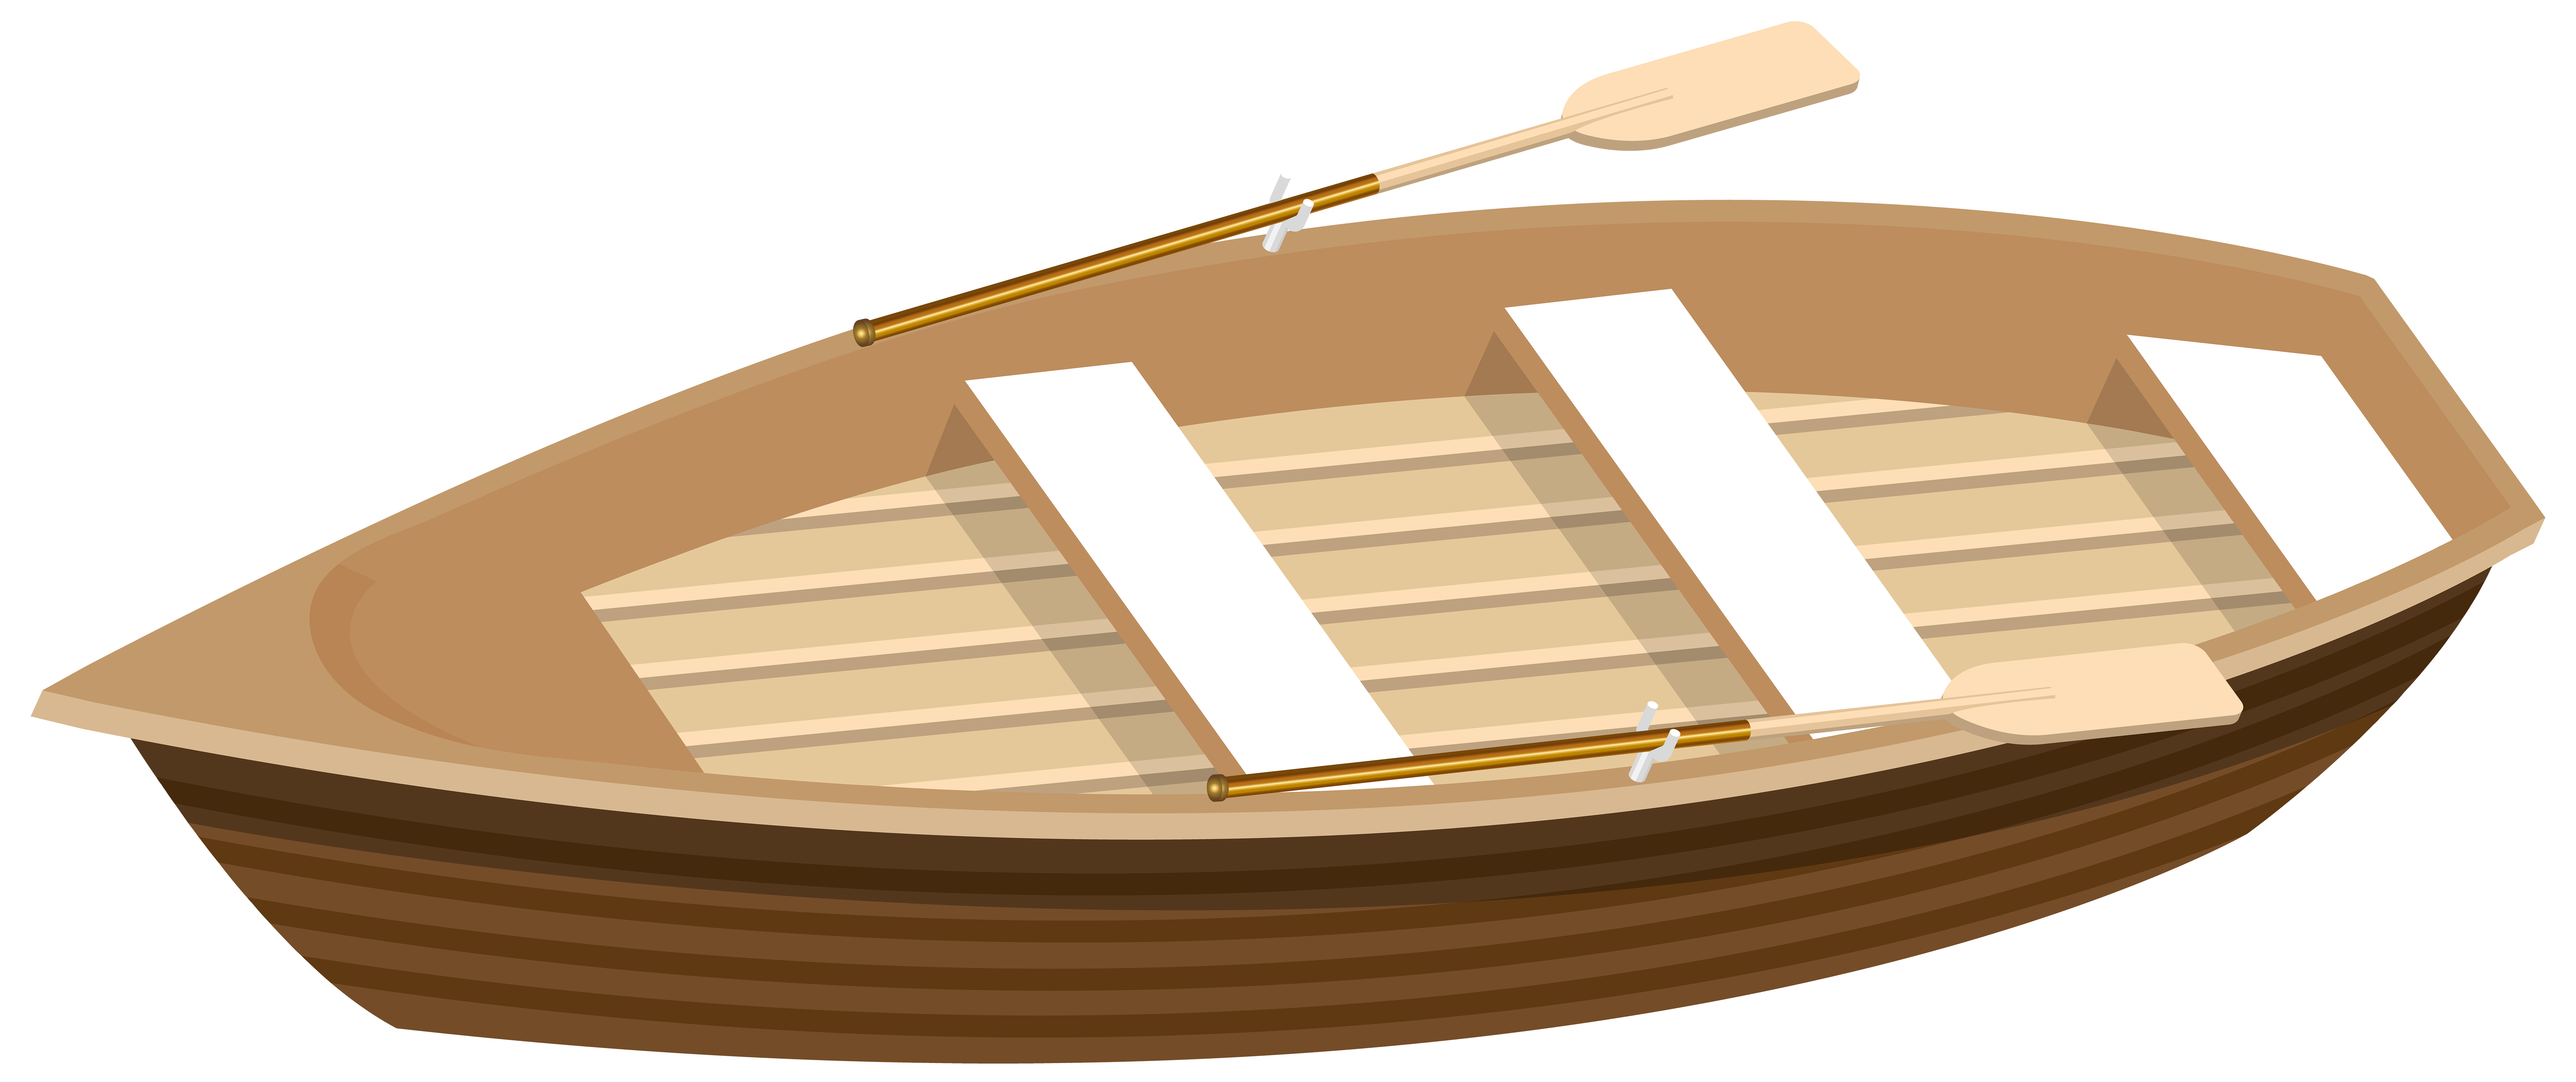 Wooden Boat Transparent PNG Clip Art Image | Gallery ...